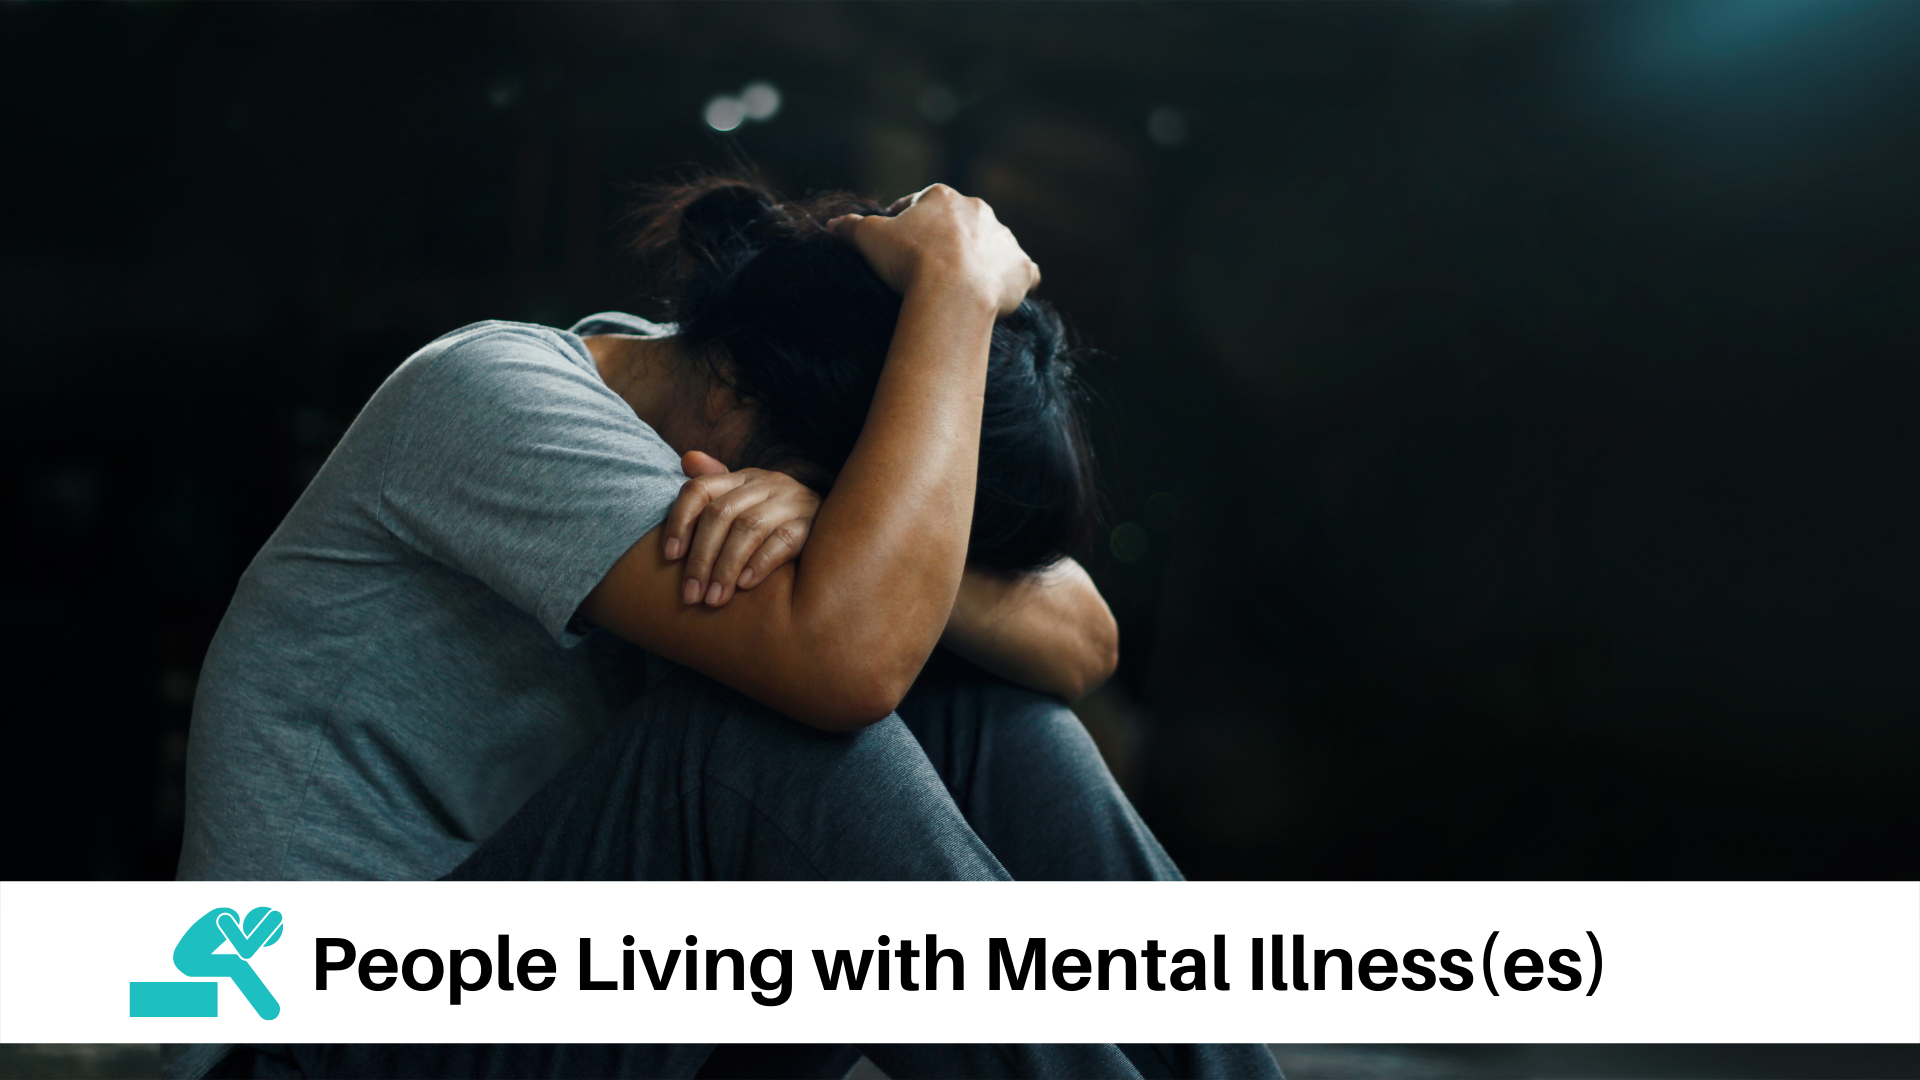 People Living with Mental Illness(es)